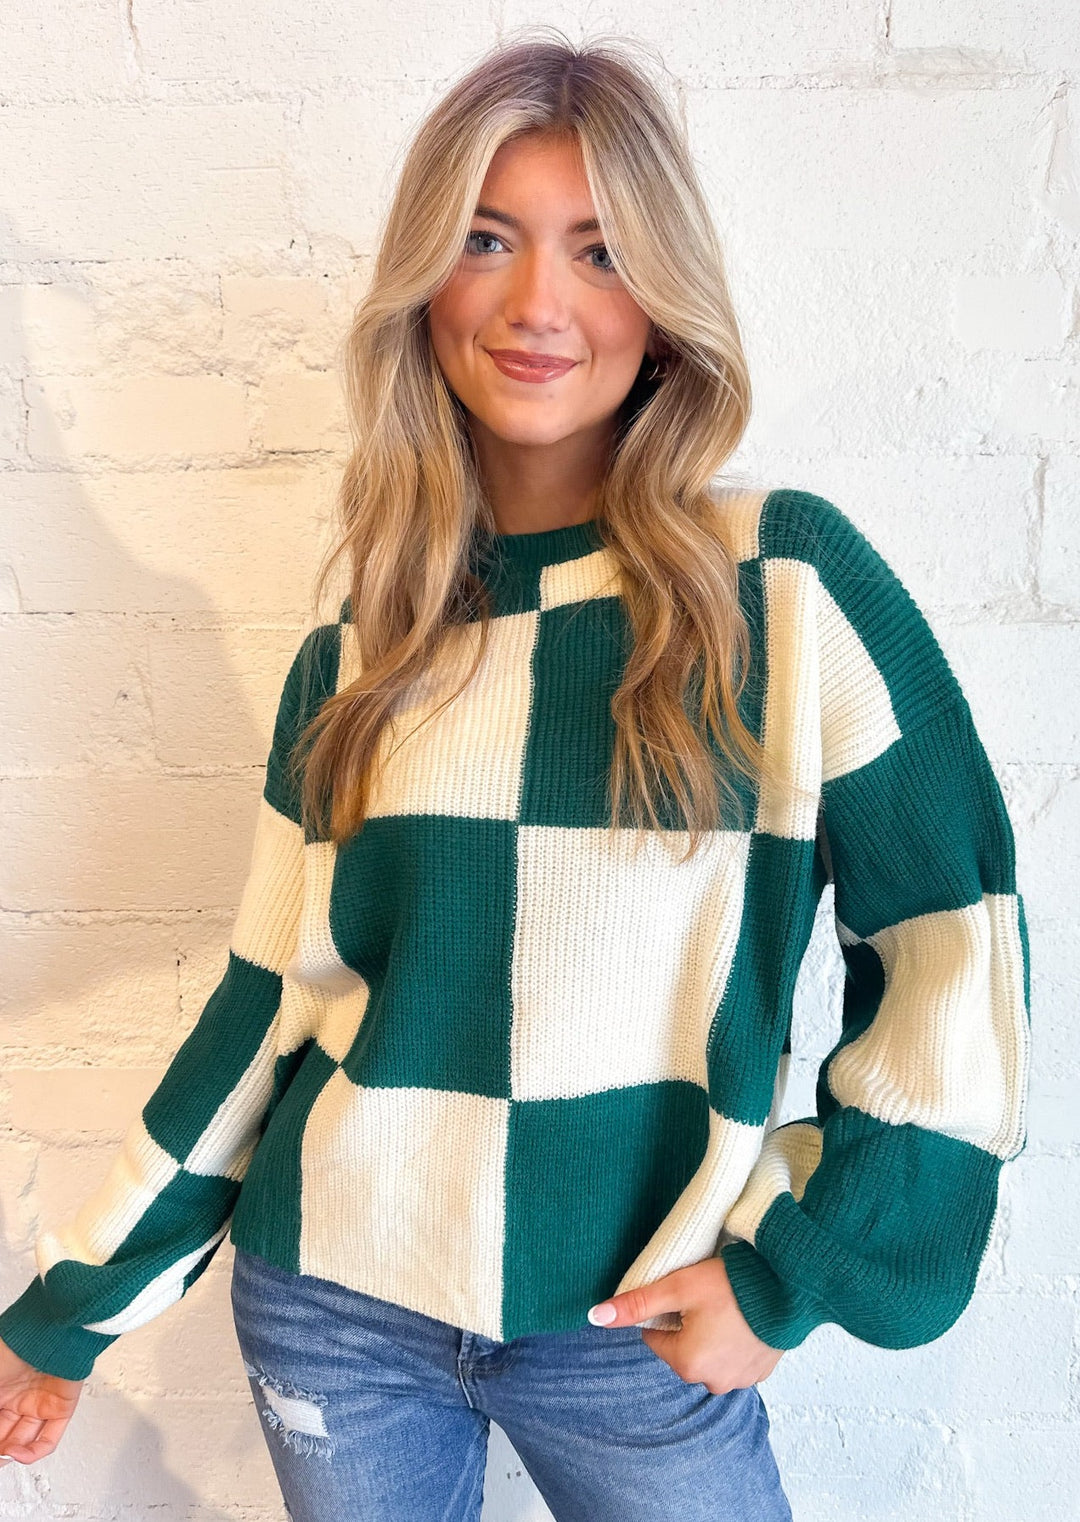 Wood Checker Sweater, Tops, Adeline, Adeline, dallas boutique, dallas texas, texas boutique, women's boutique dallas, adeline boutique, dallas boutique, trendy boutique, affordable boutique